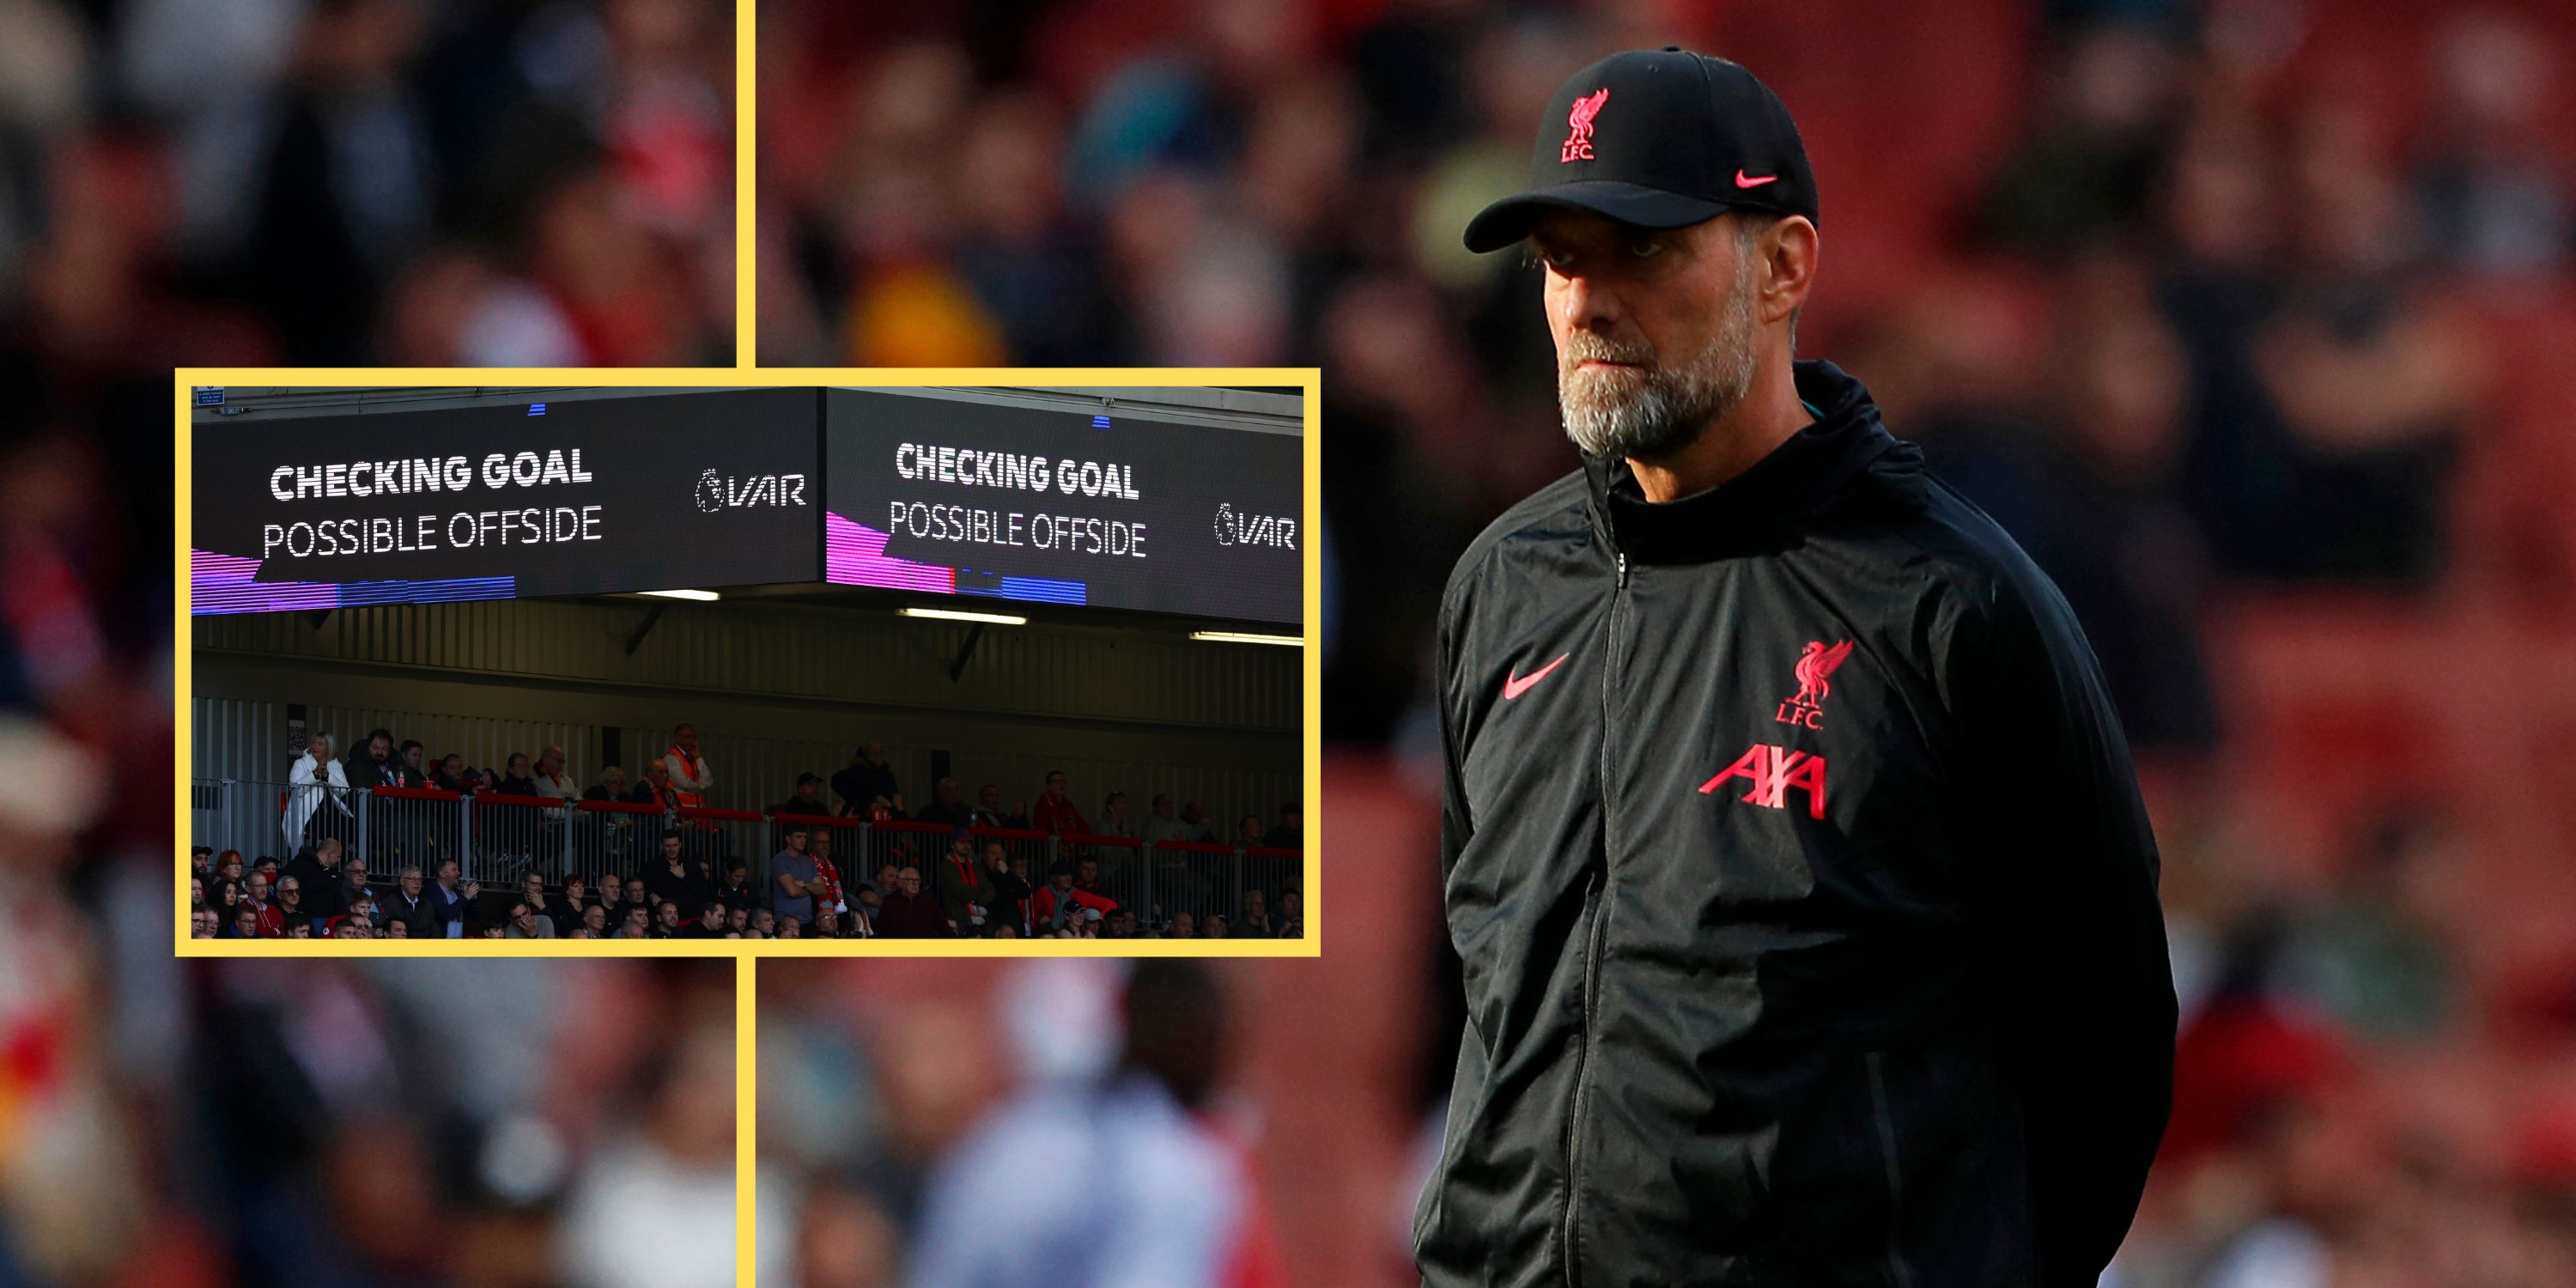 VAR technology cock-up failed to catch potential Arsenal offside goal against Liverpool